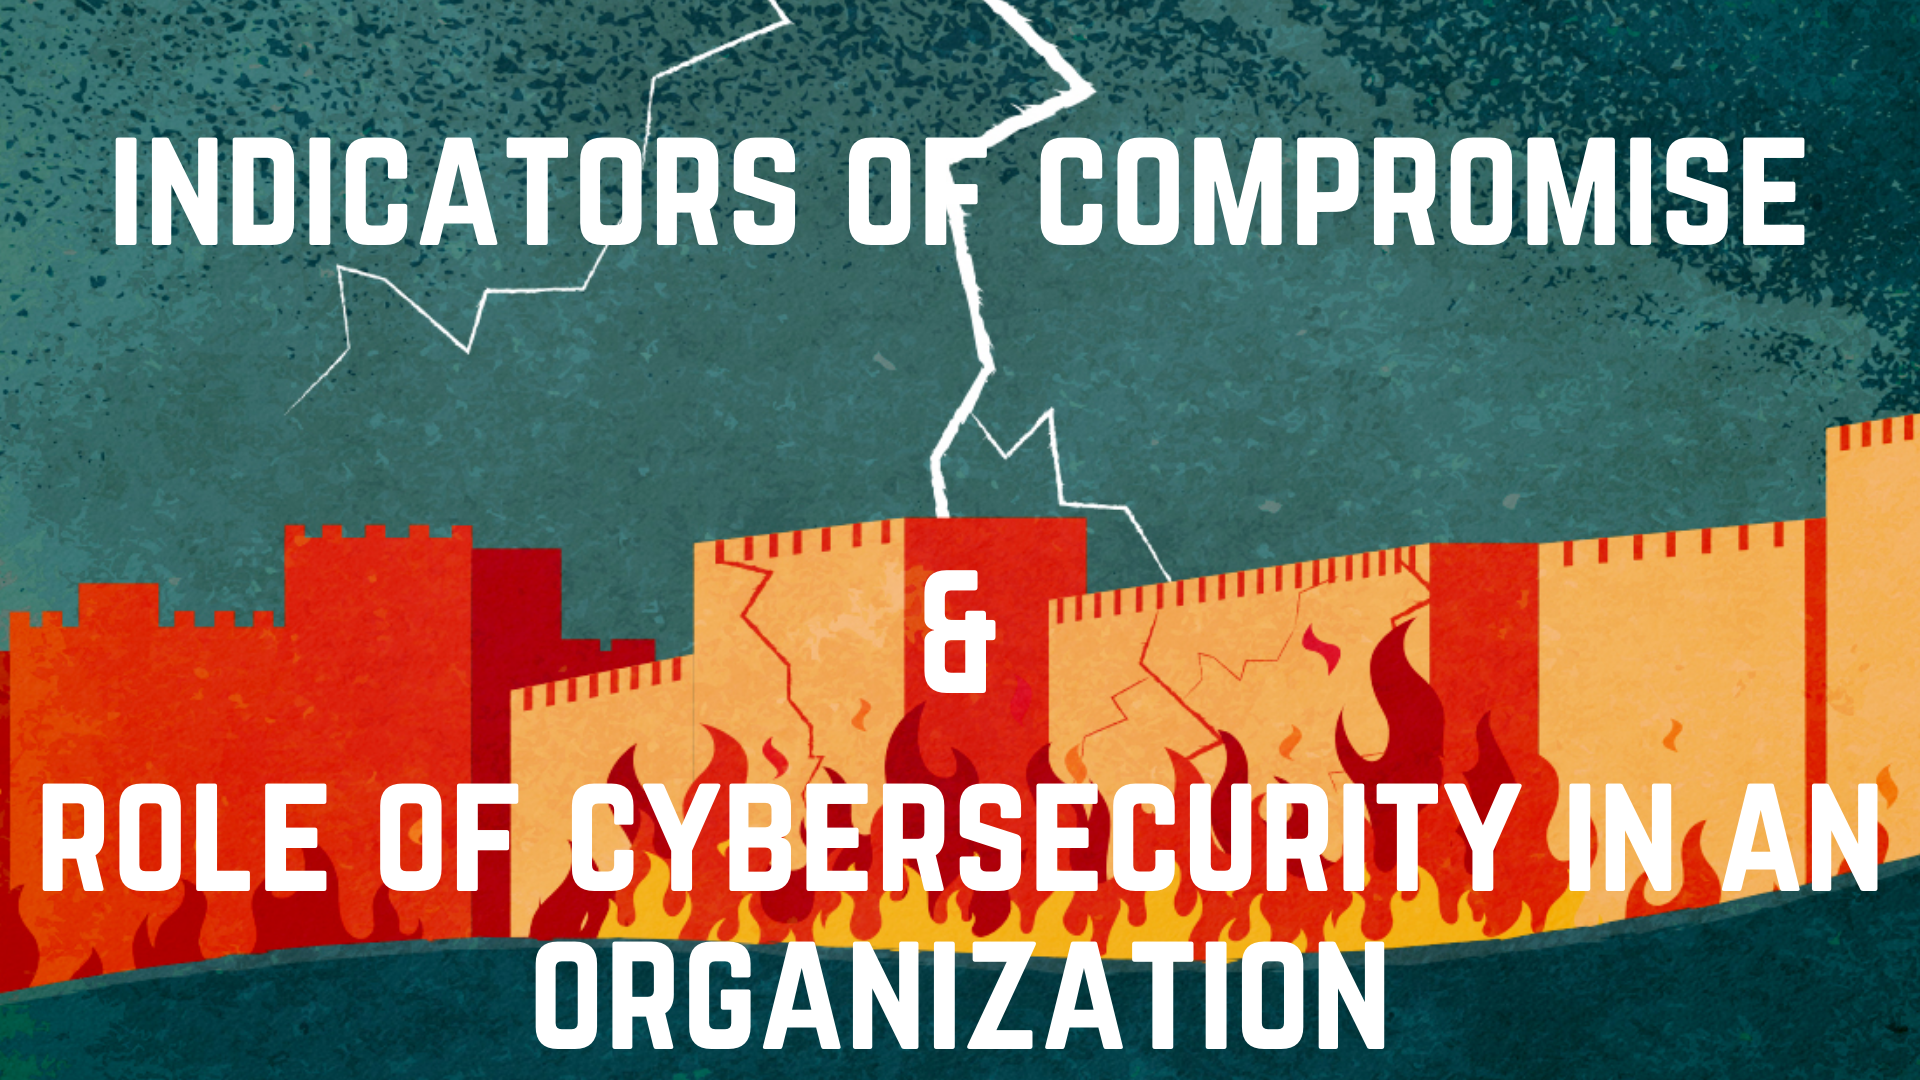 Indicators of Compromise and Role of Cybersecurity in an Organization